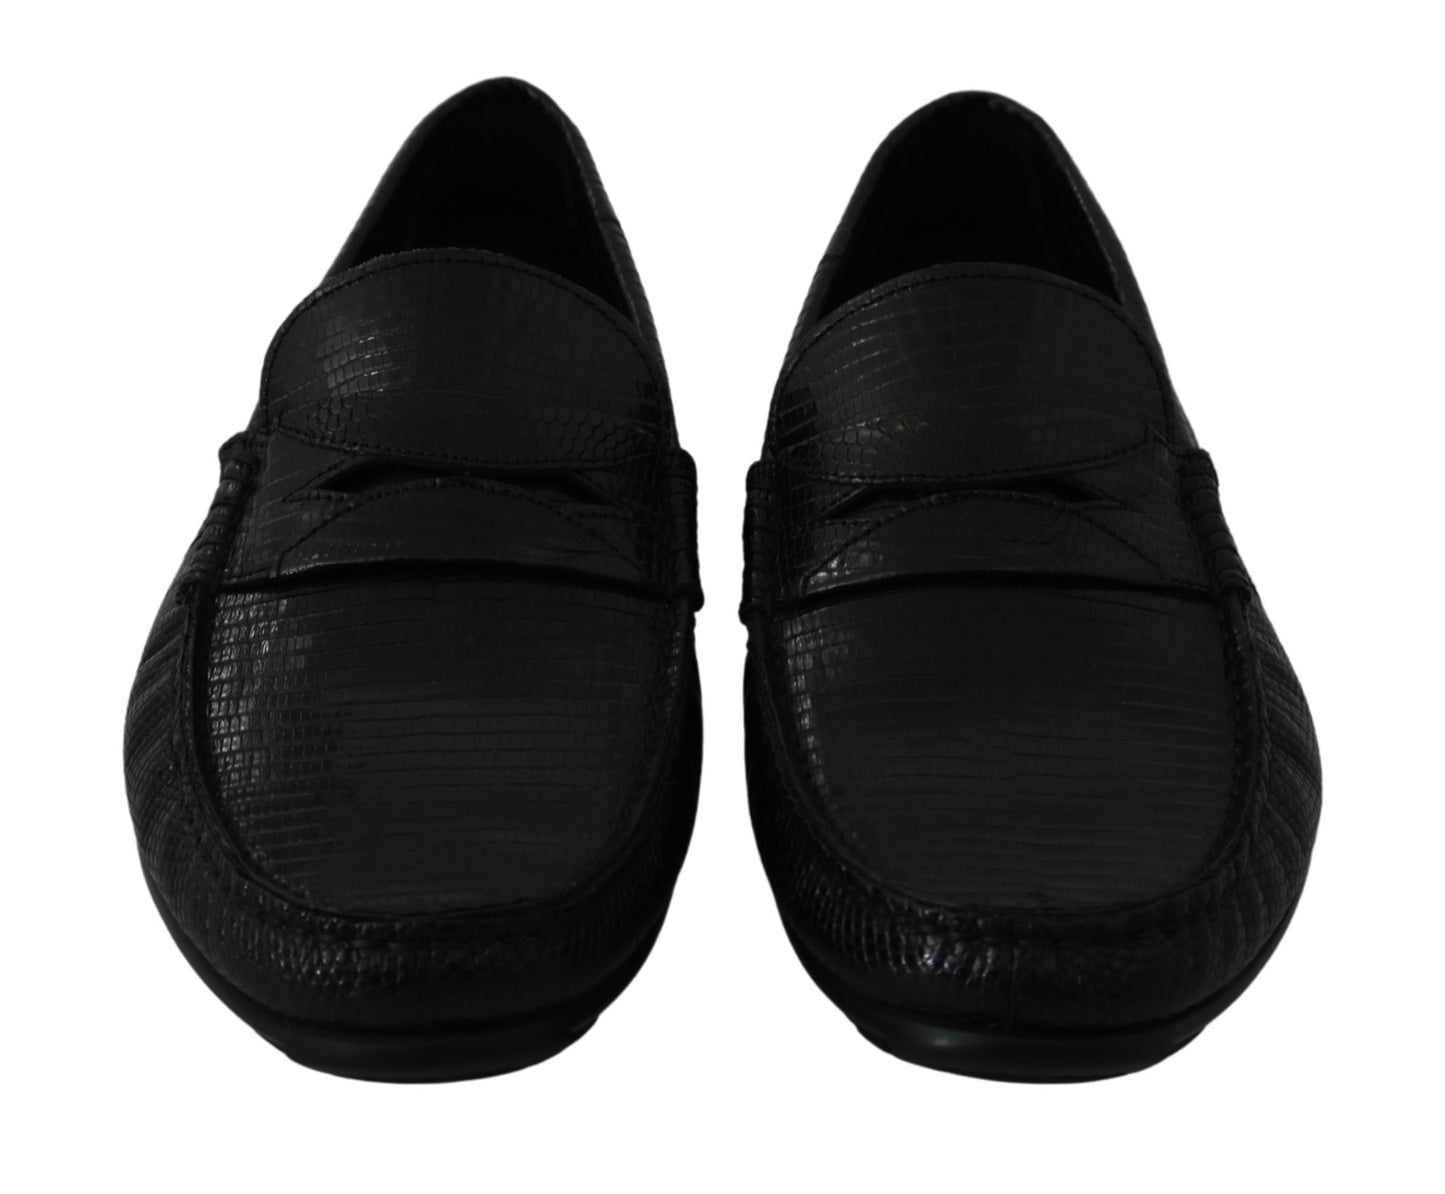 Dolce & Gabbana Black Lizard Leather Flat Loafers Shoes